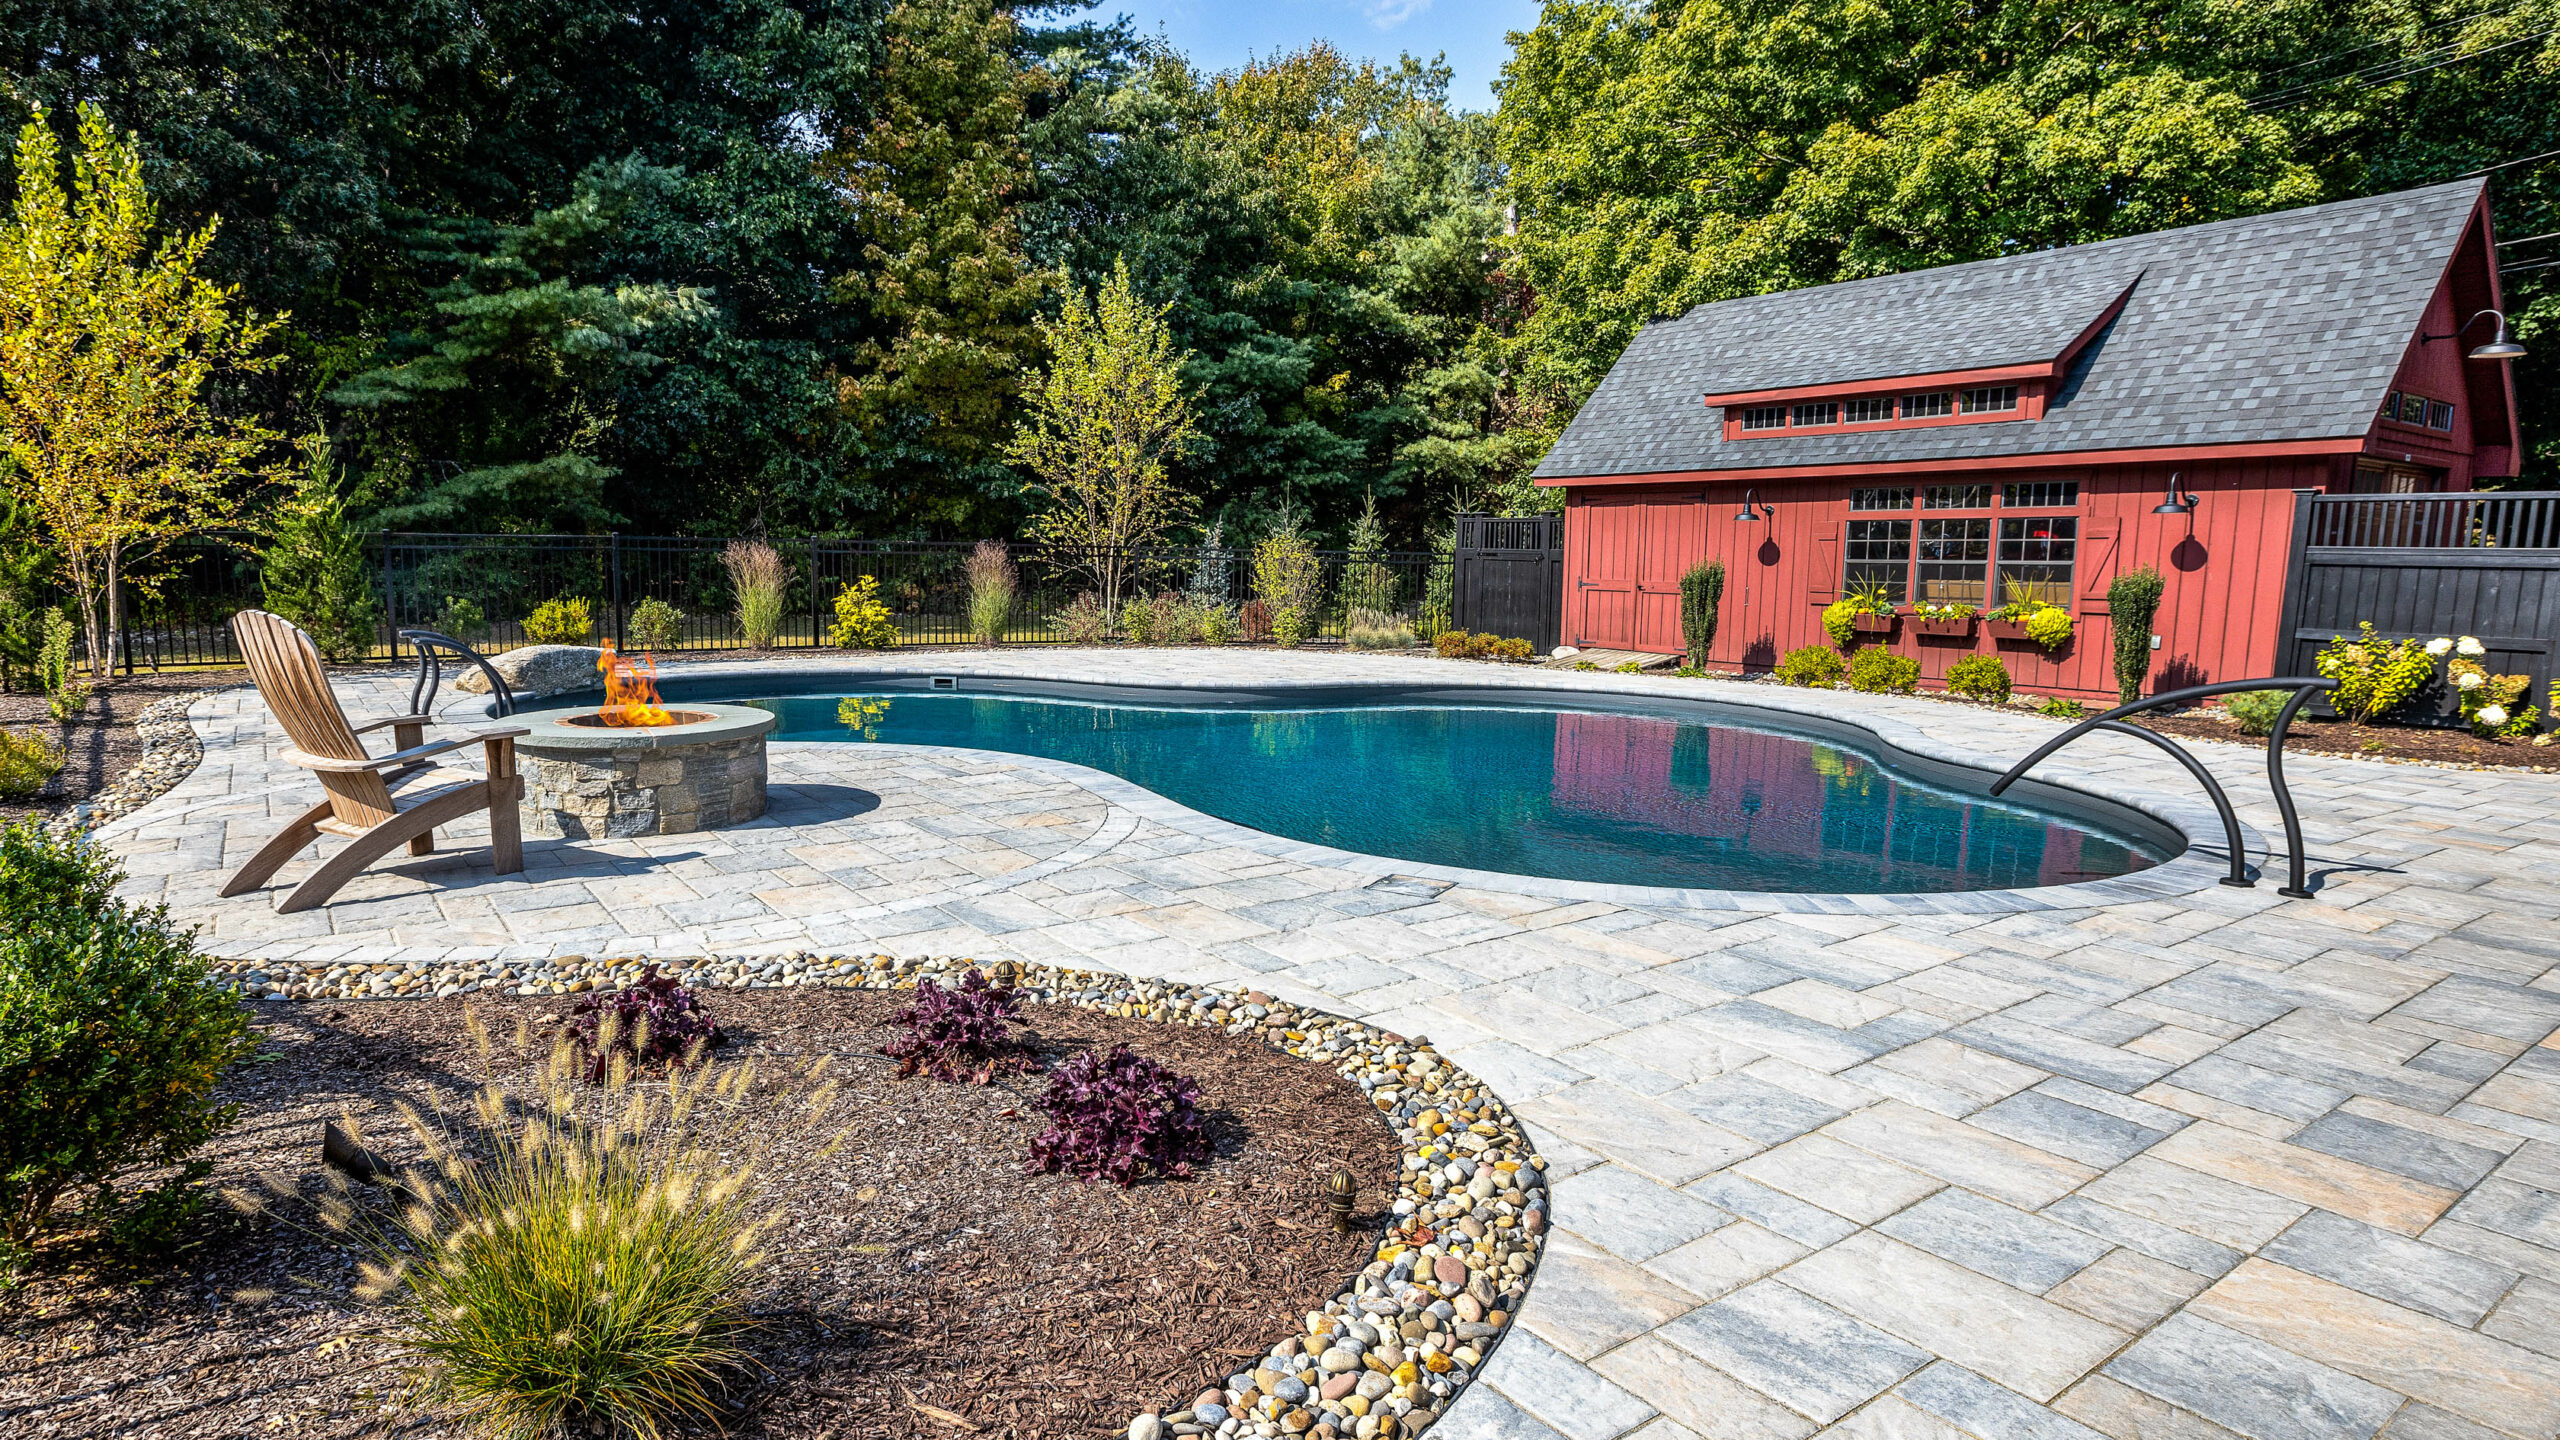 Pool with lounge chairs and a fire pit.